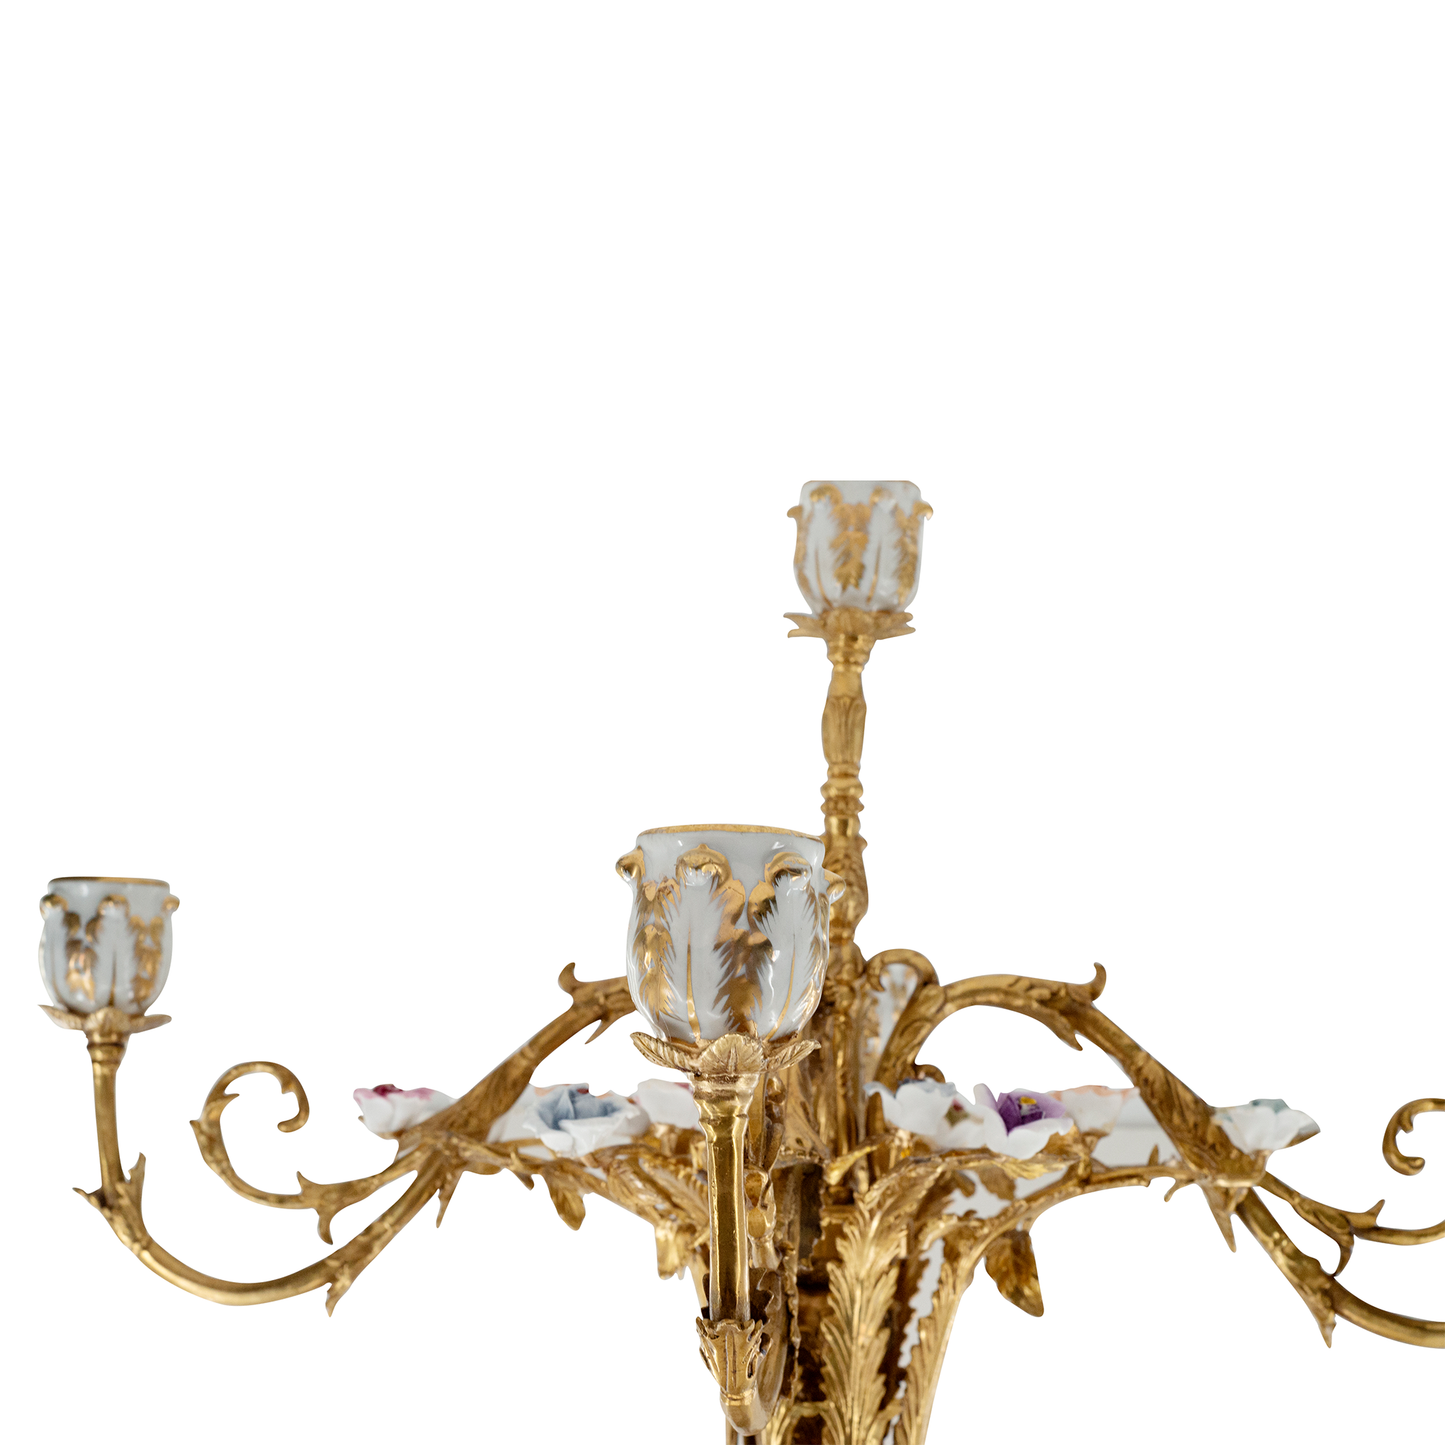 Hand-Painted Bronze & Porcelain Five Cup Candelabra